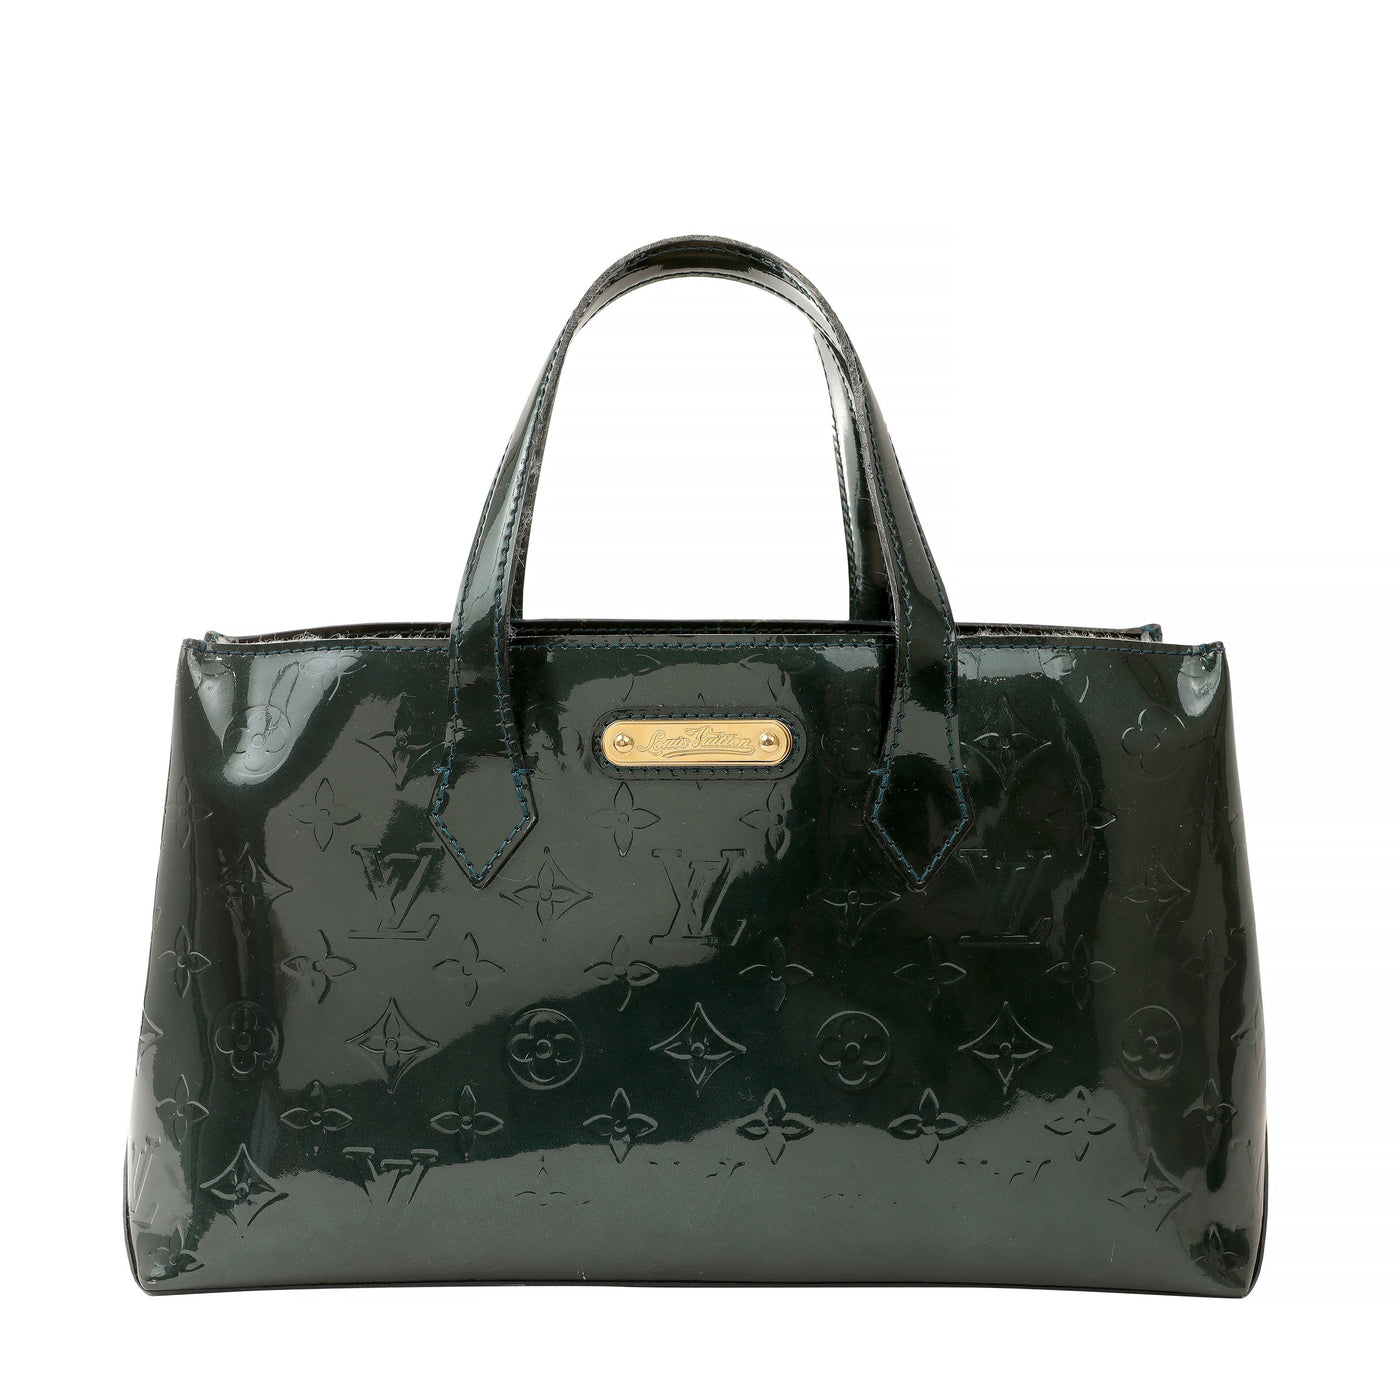 Louis Vuitton Teal Patent Leather Monogram Small Tote